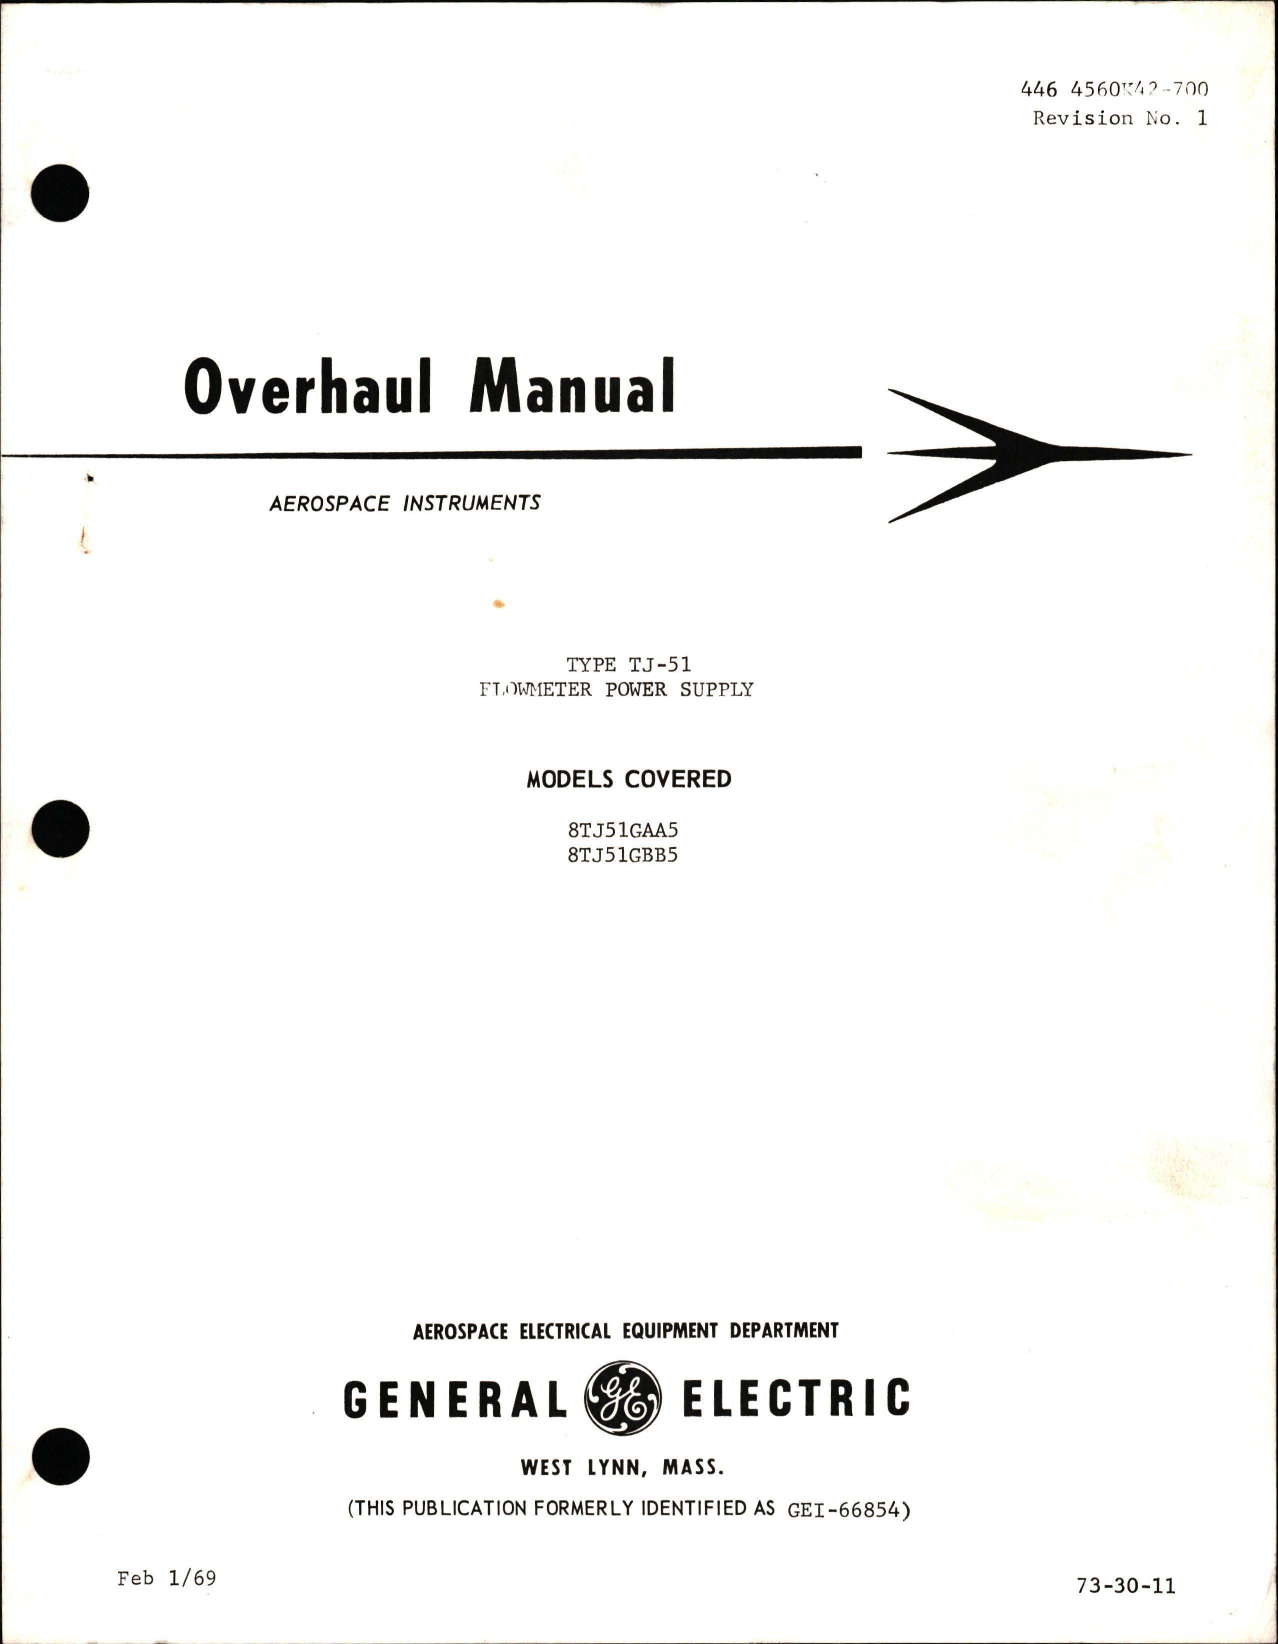 Sample page 1 from AirCorps Library document: Overhaul Manual for Flowmeter Power Supply - Type TJ-51 - Models 8TJ51GAA5 and 8TJ51GBB5 